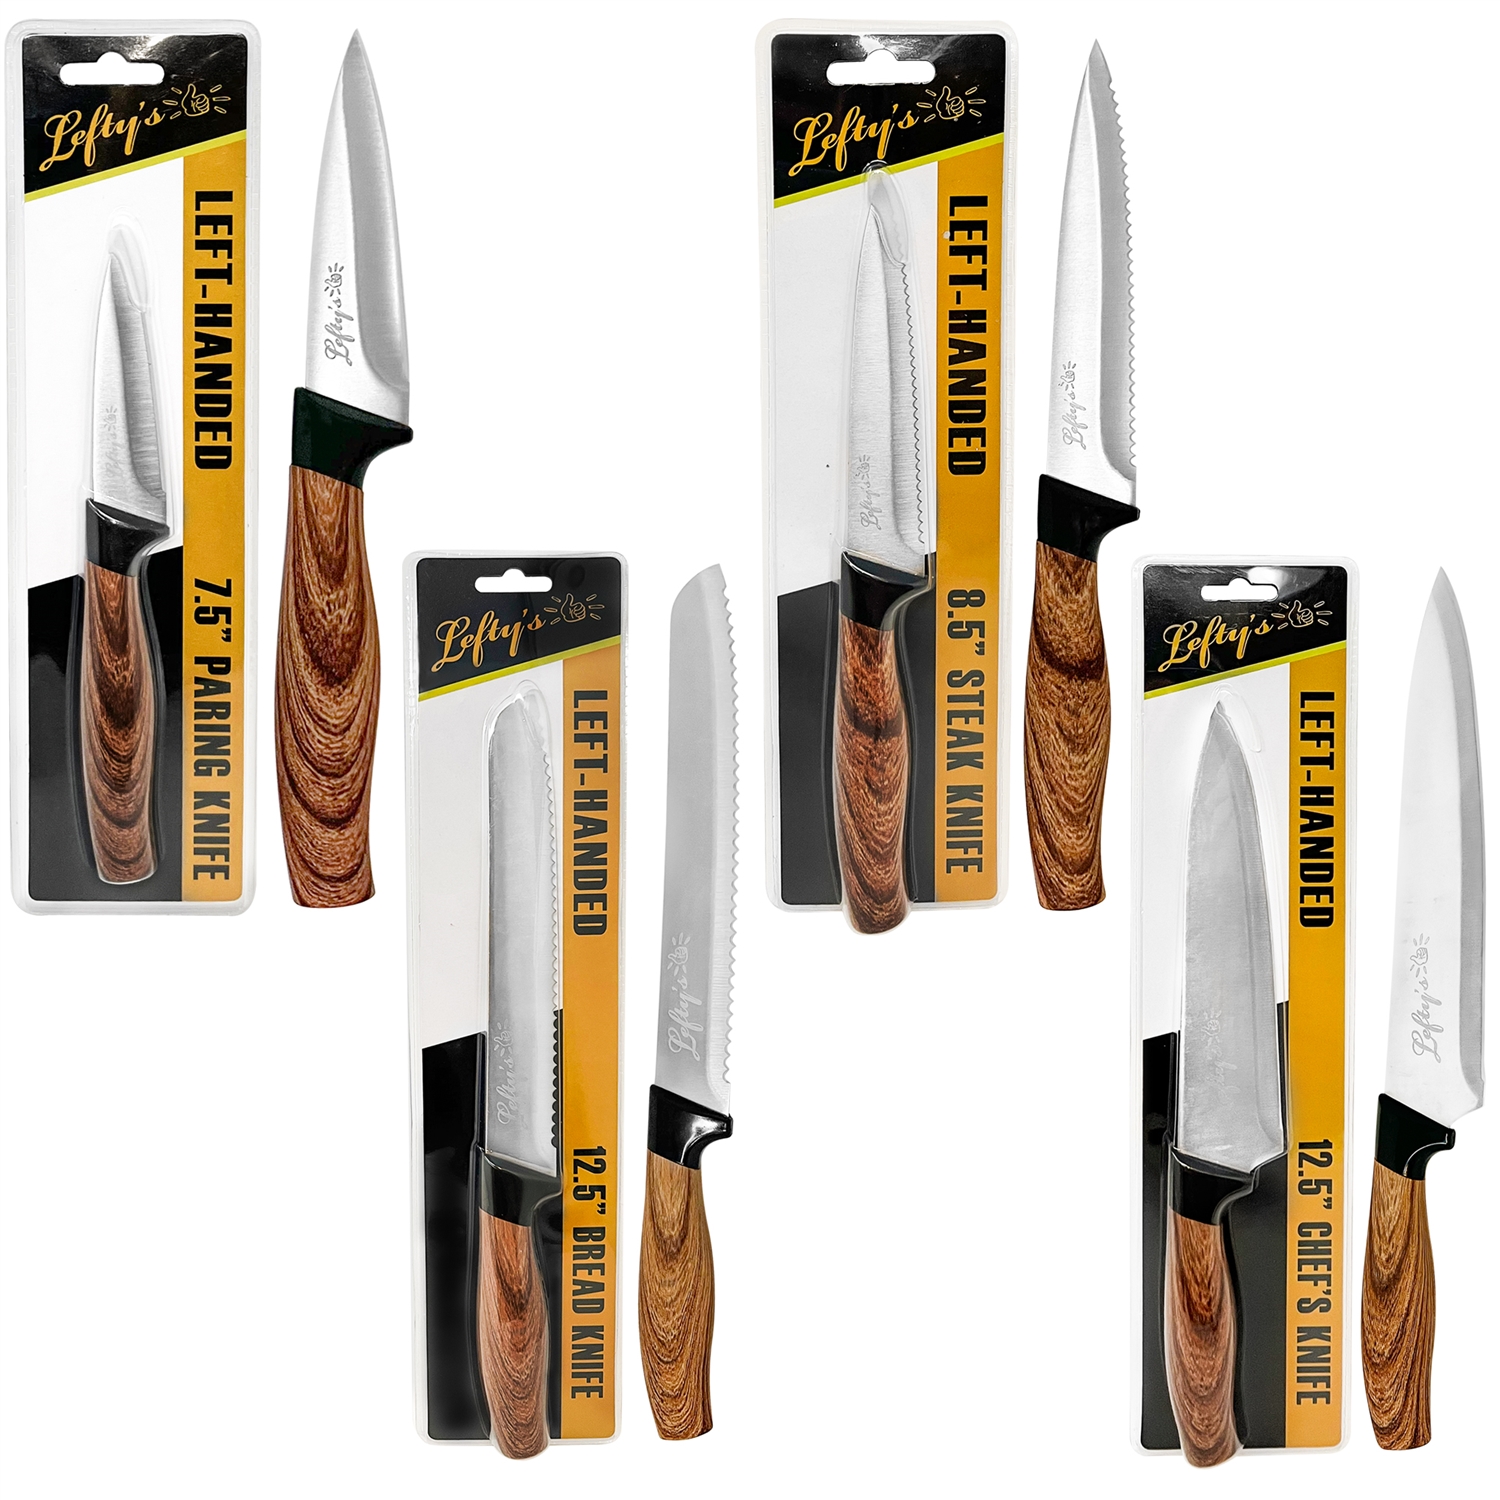 Set of 4 Left-Handed Knives with Comfort Handles